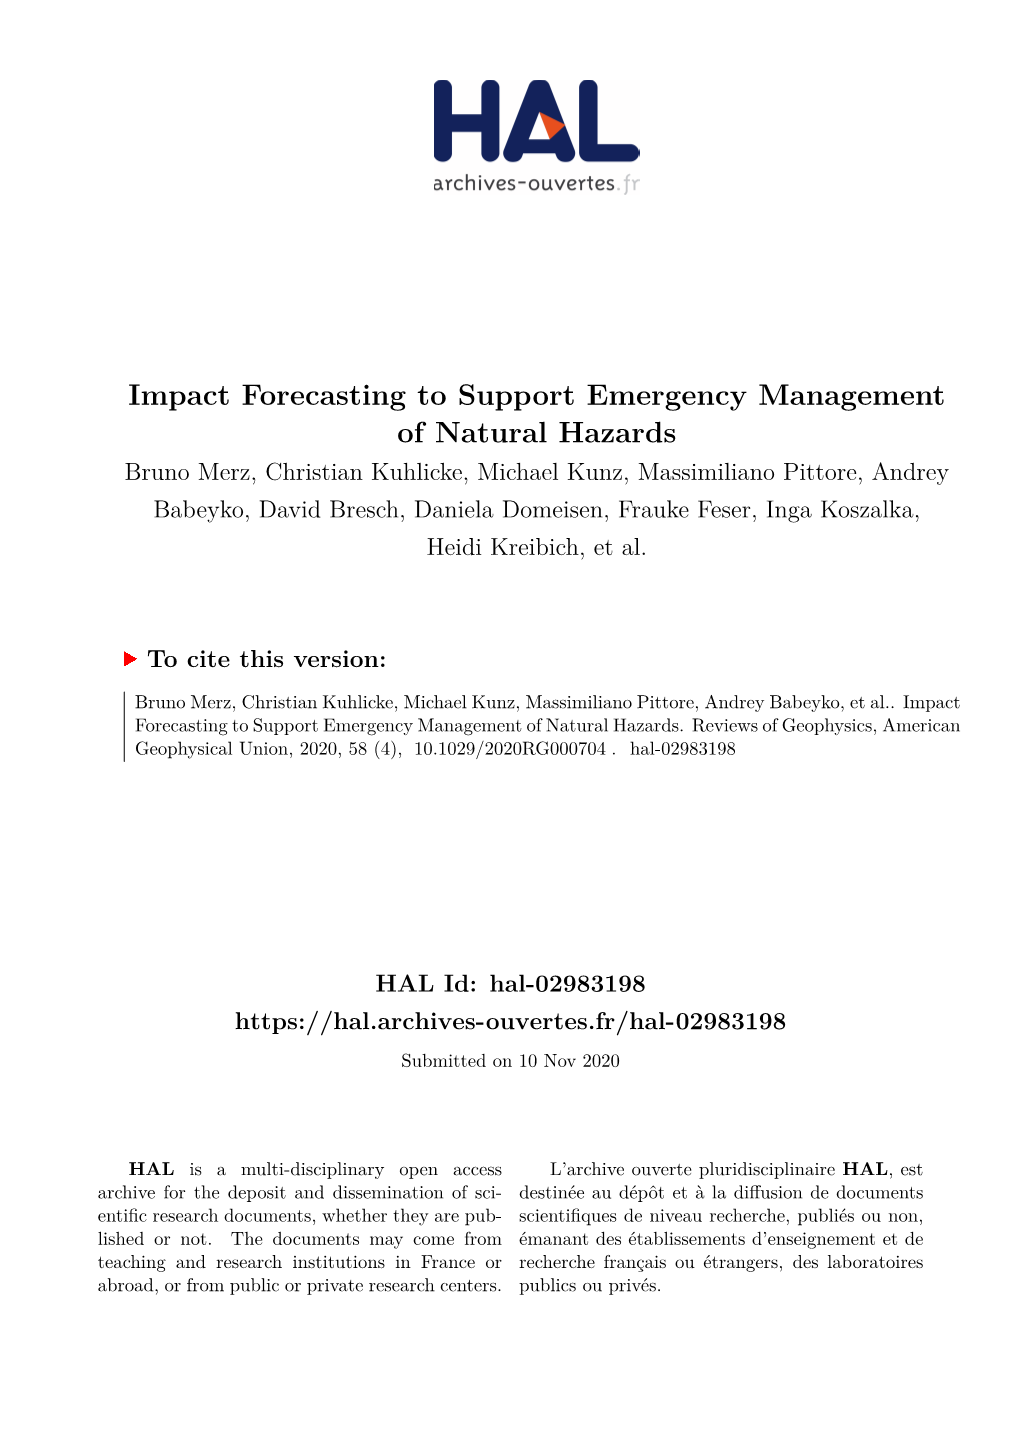 Impact Forecasting to Support Emergency Management of Natural